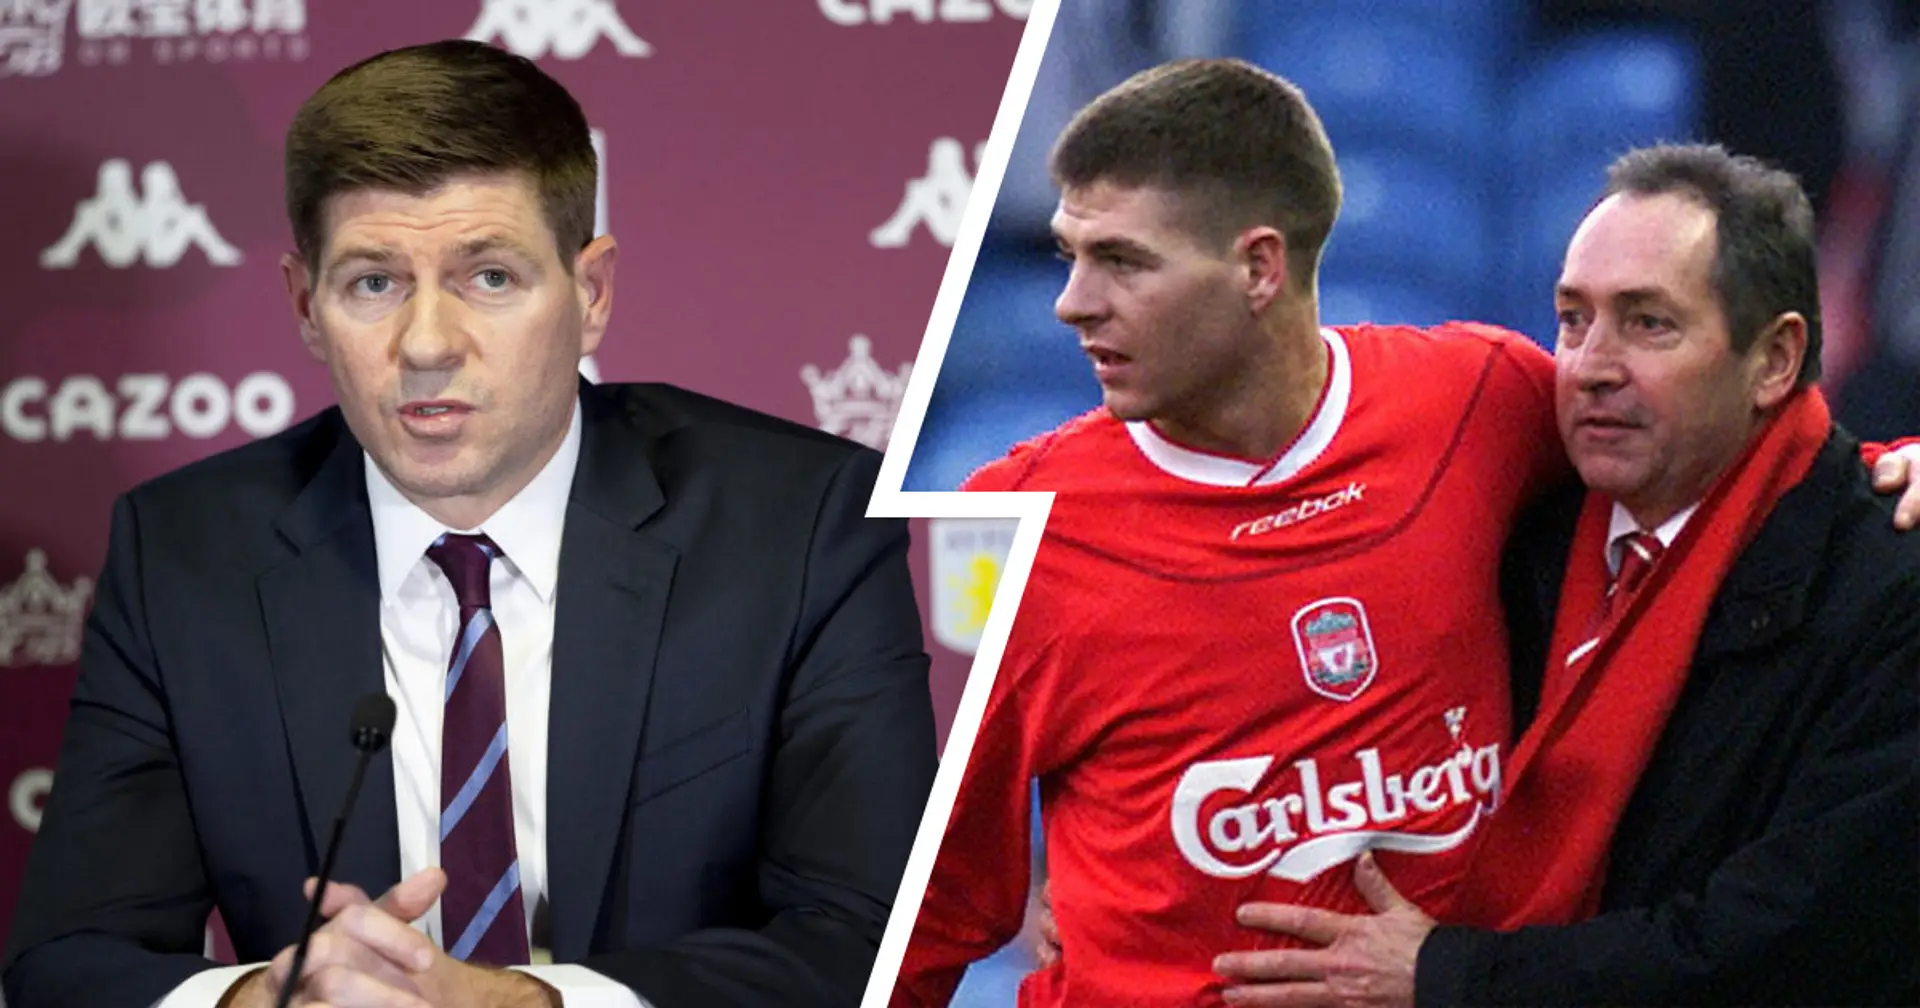 'I’ll be forever in his debt': Steven Gerrard pays touching tribute to late Gerard Houllier